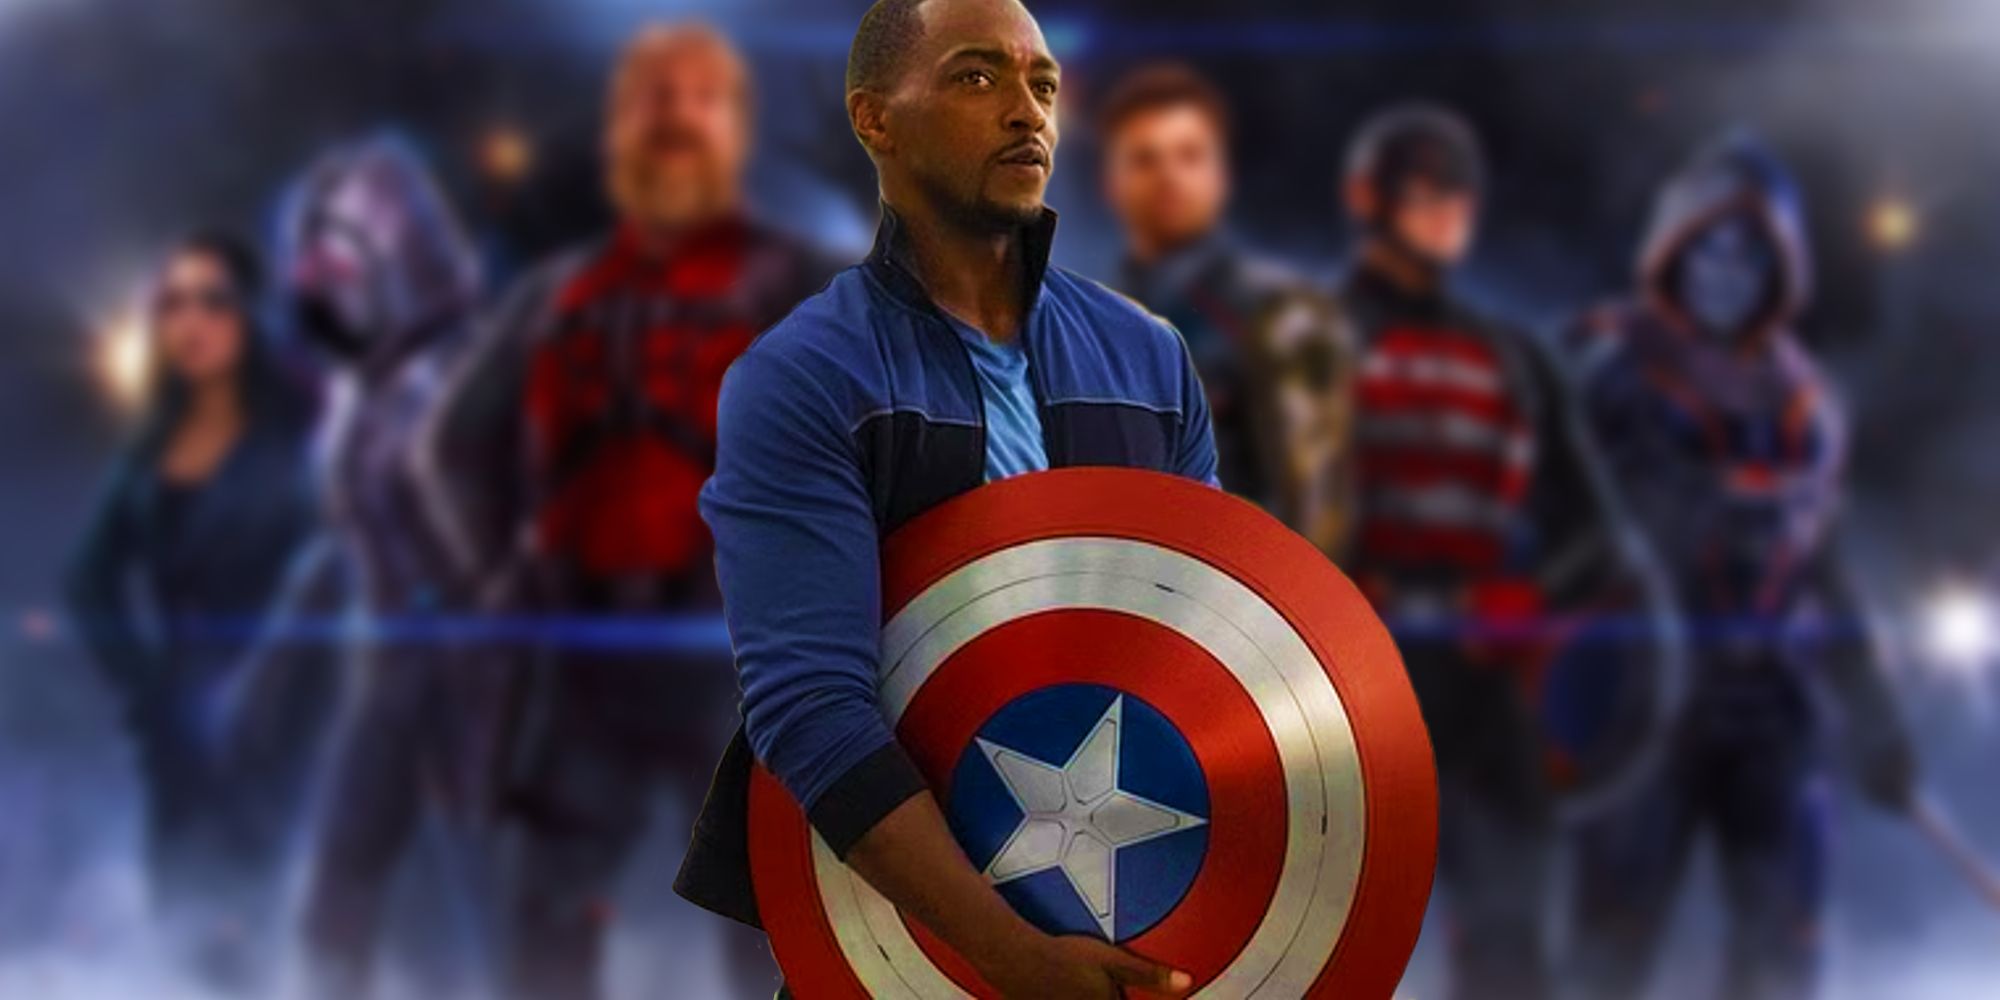 Anthony Mackie as Sam Wilson holding his Captain America shield above a blurred image of the Thunderbolts MCU line-up